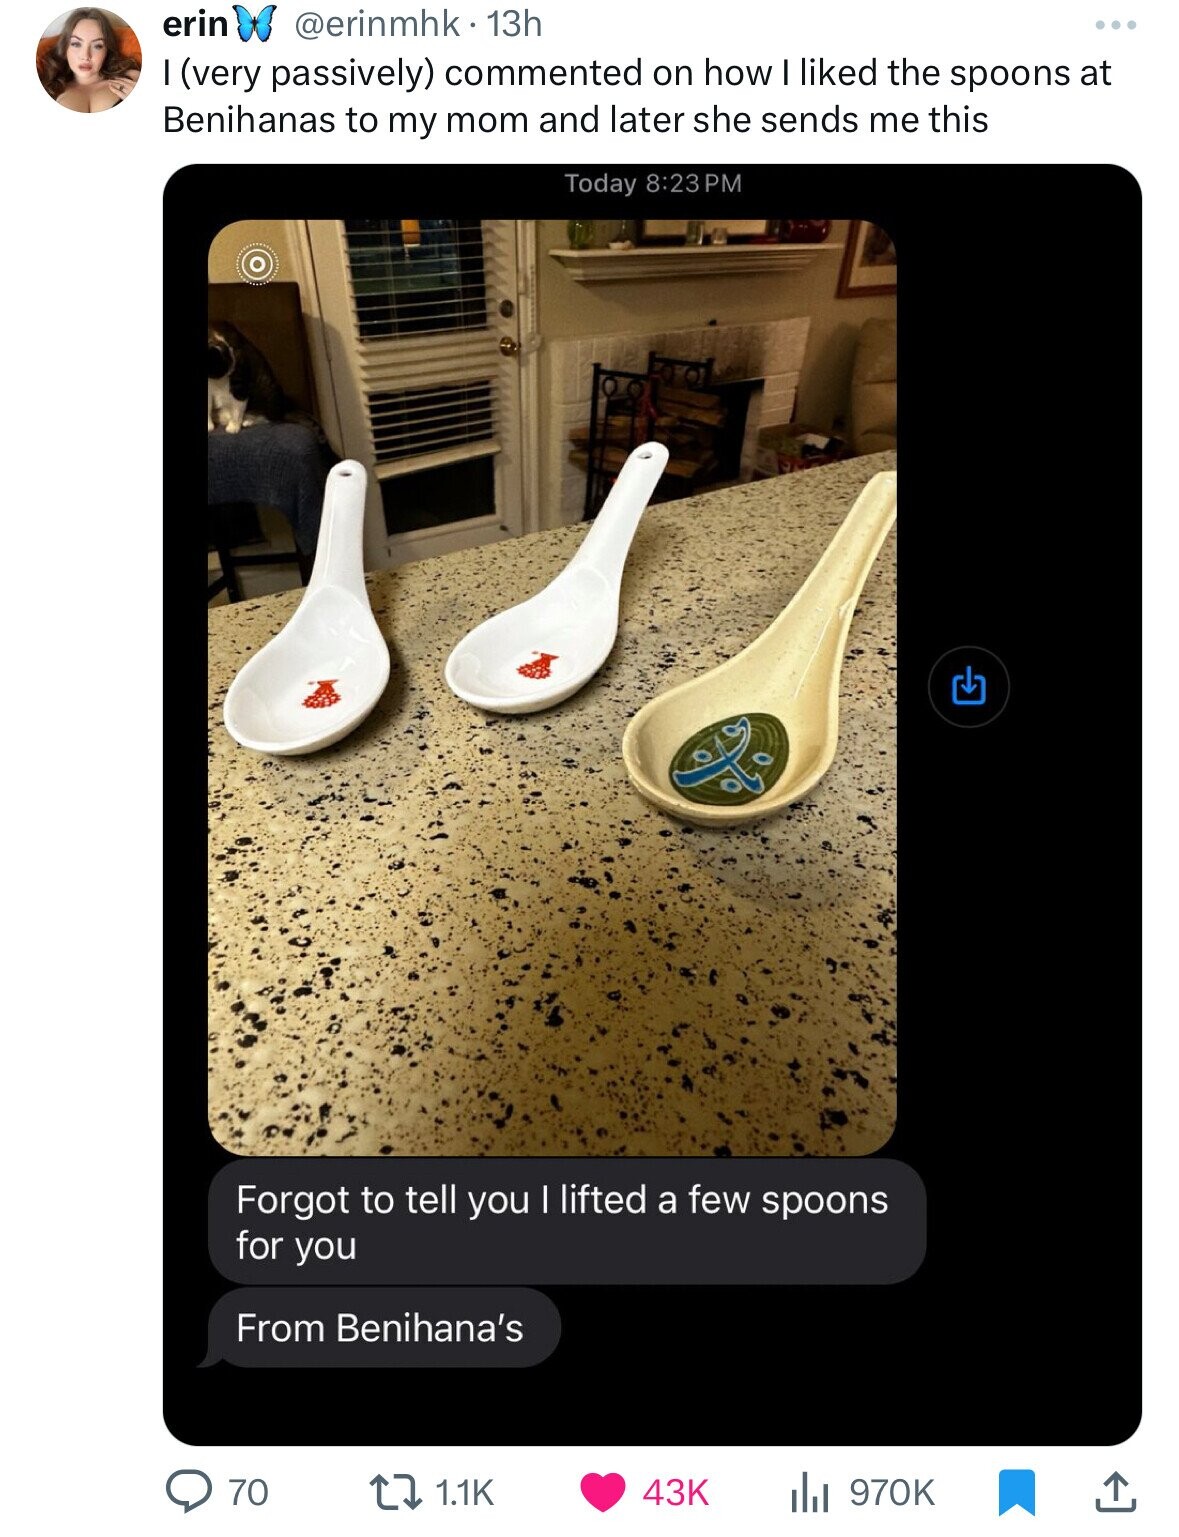 website - erin 13h I very passively commented on how I d the spoons at Benihanas to my mom and later she sends me this Today O Forgot to tell you I lifted a few spoons for you From Benihana's 70 43K il ,